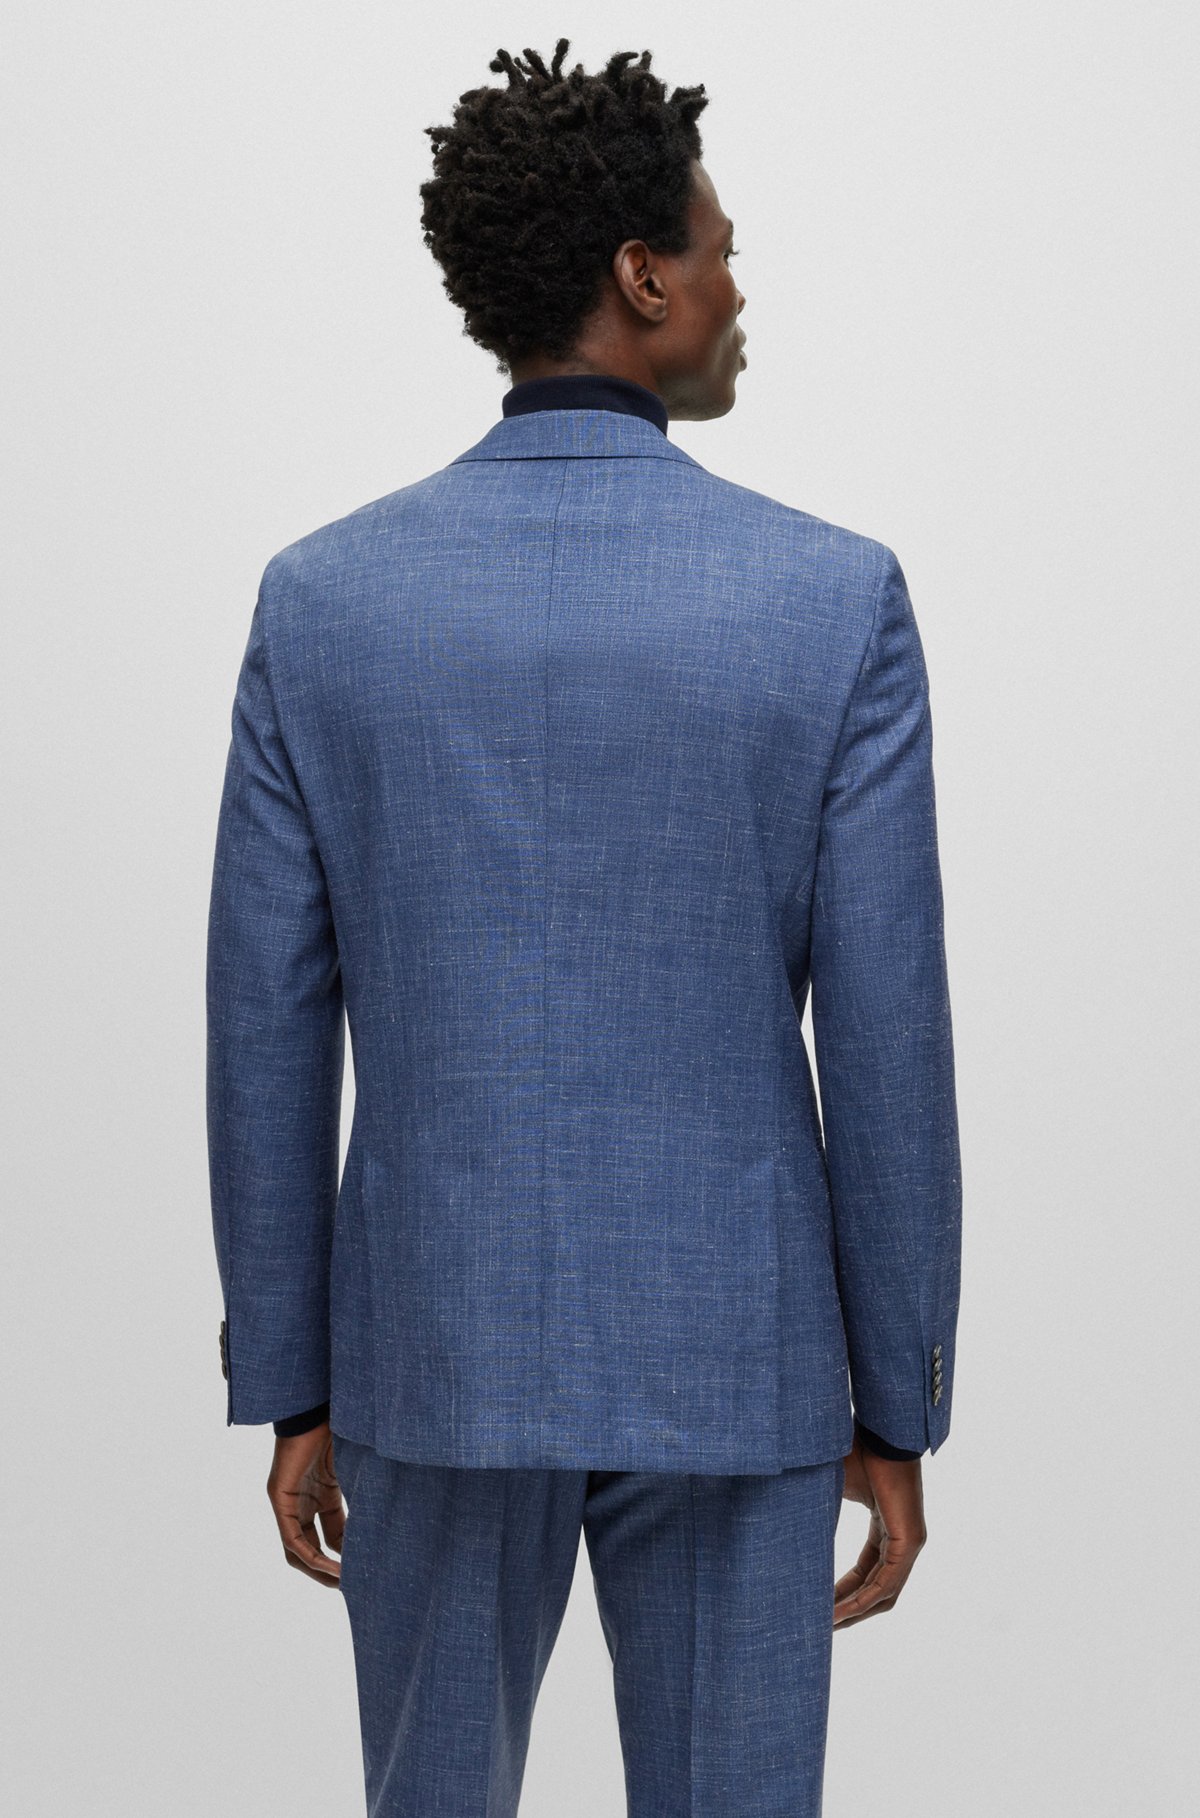 BOSS - Slim-fit suit in wool, Tussah silk and linen